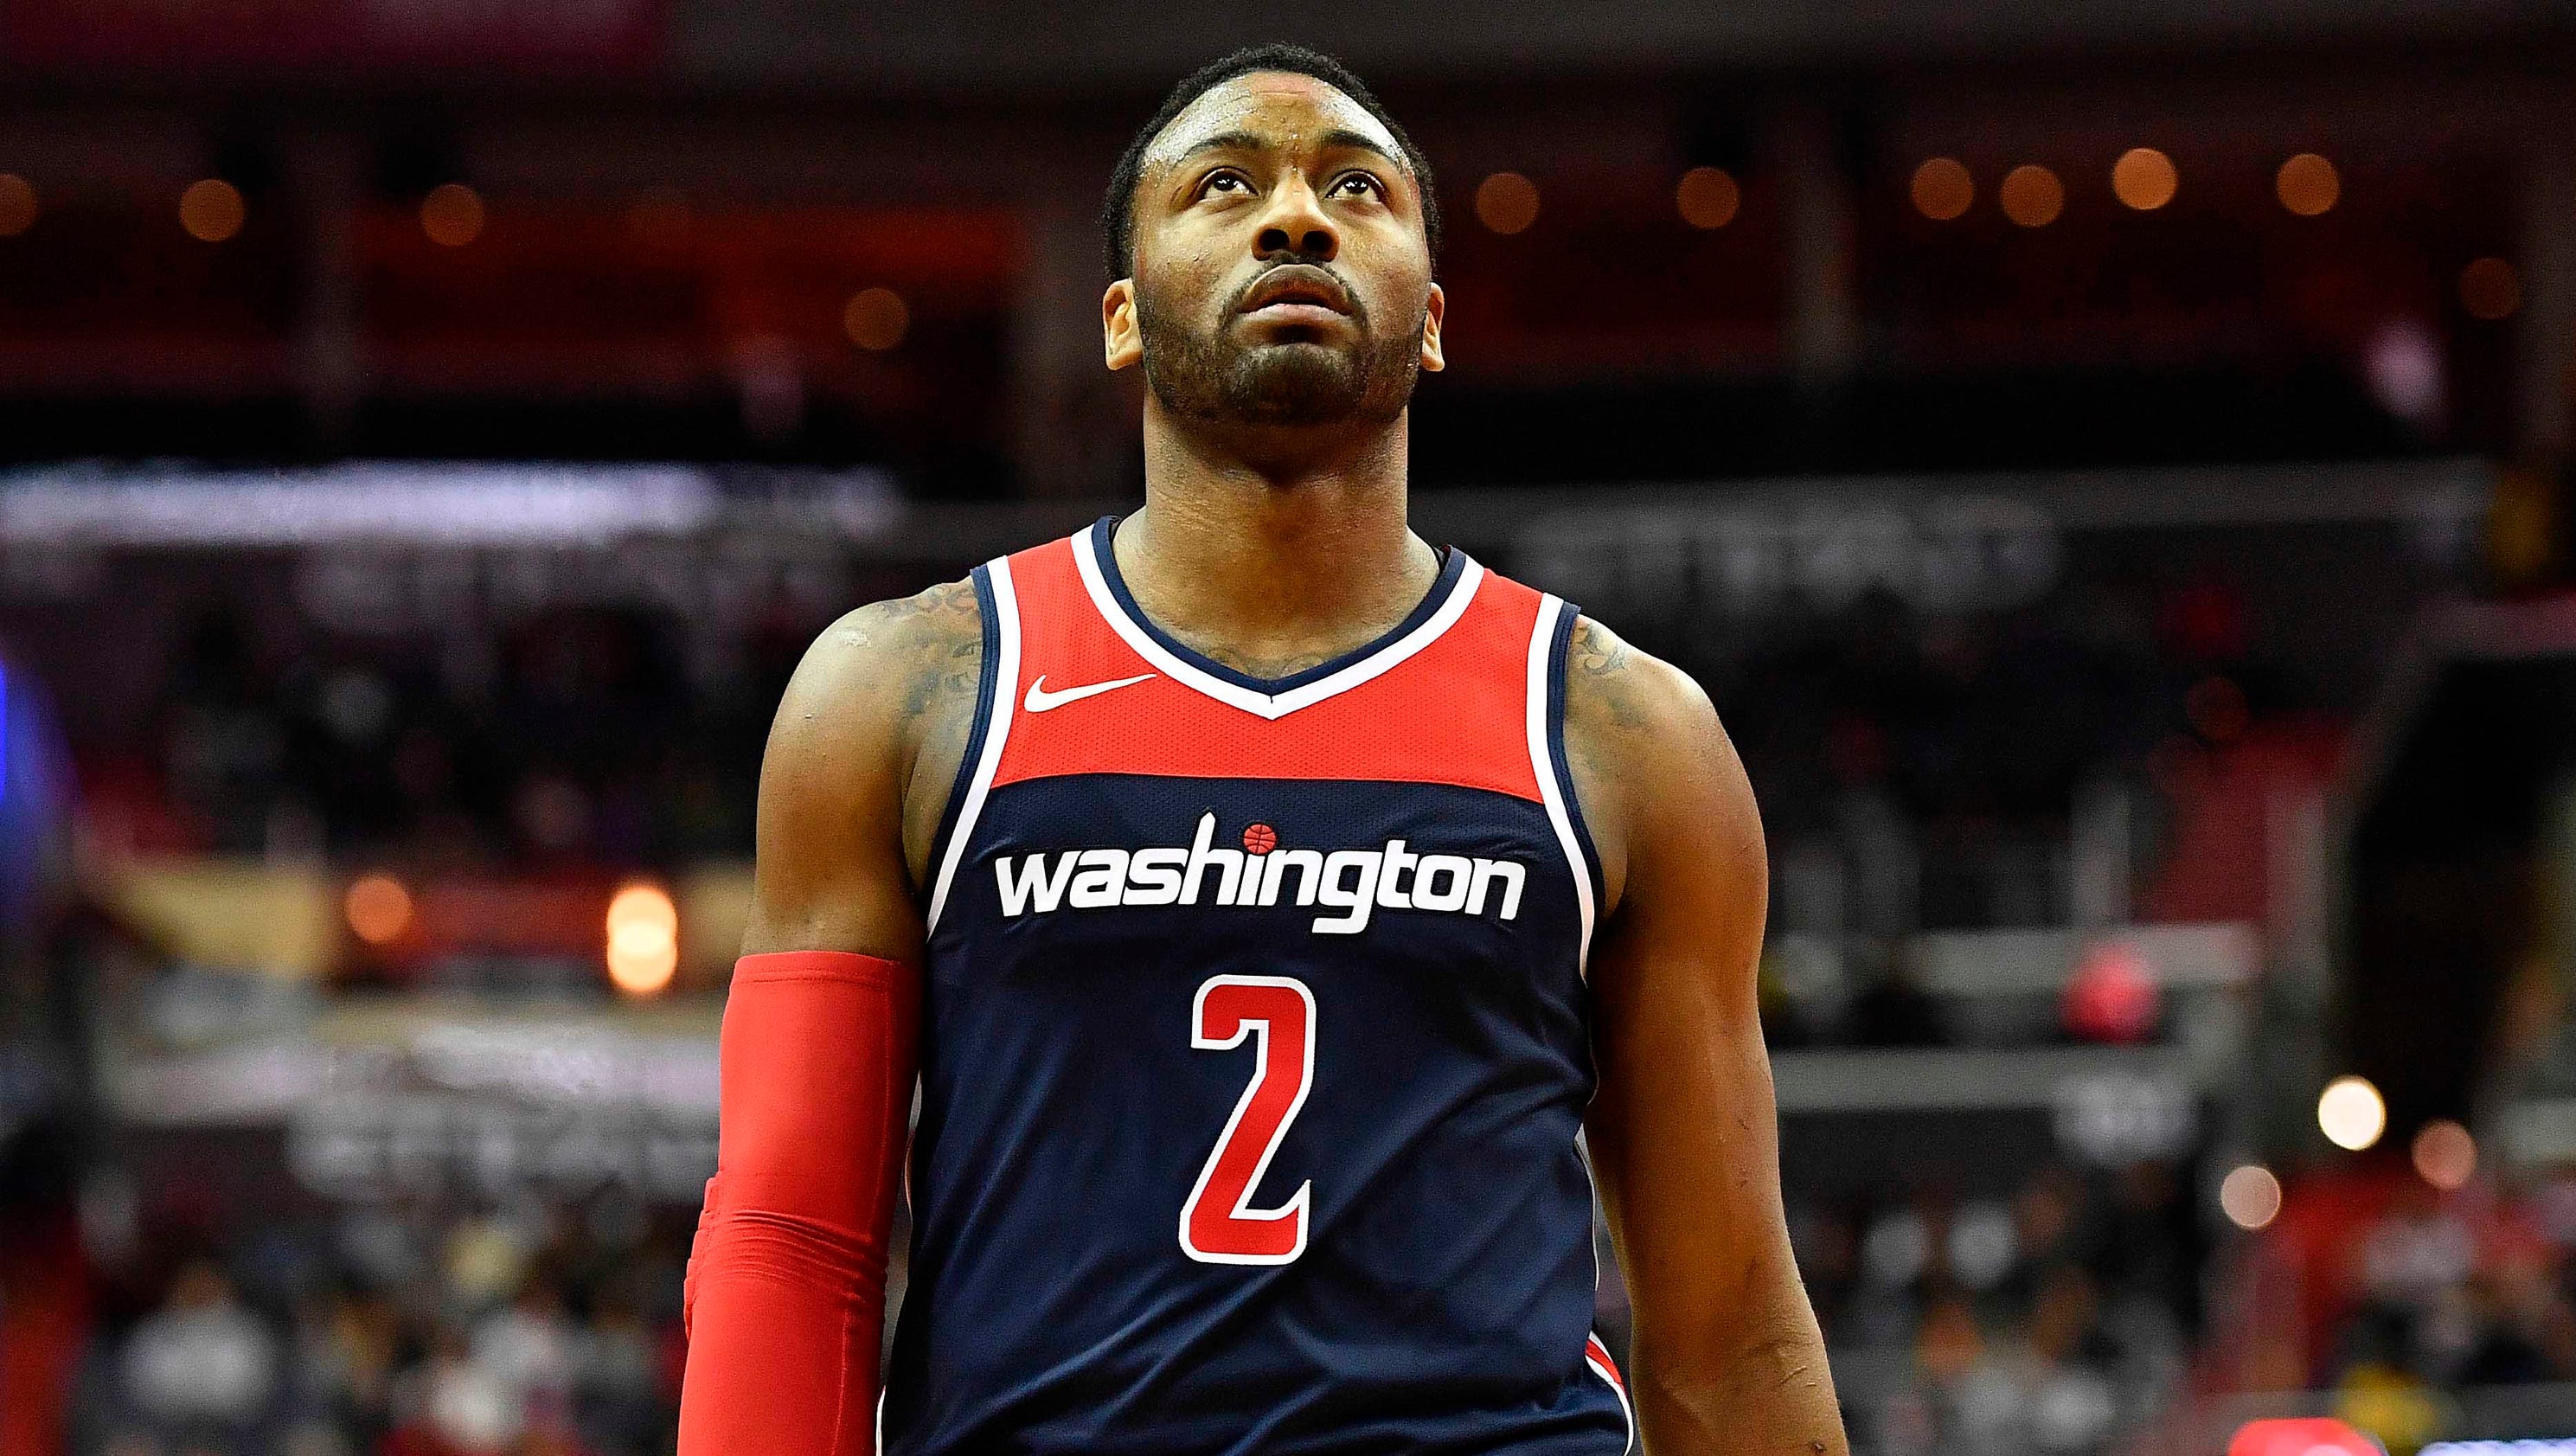 John Wall calls out Wizards teammates after disappointing season